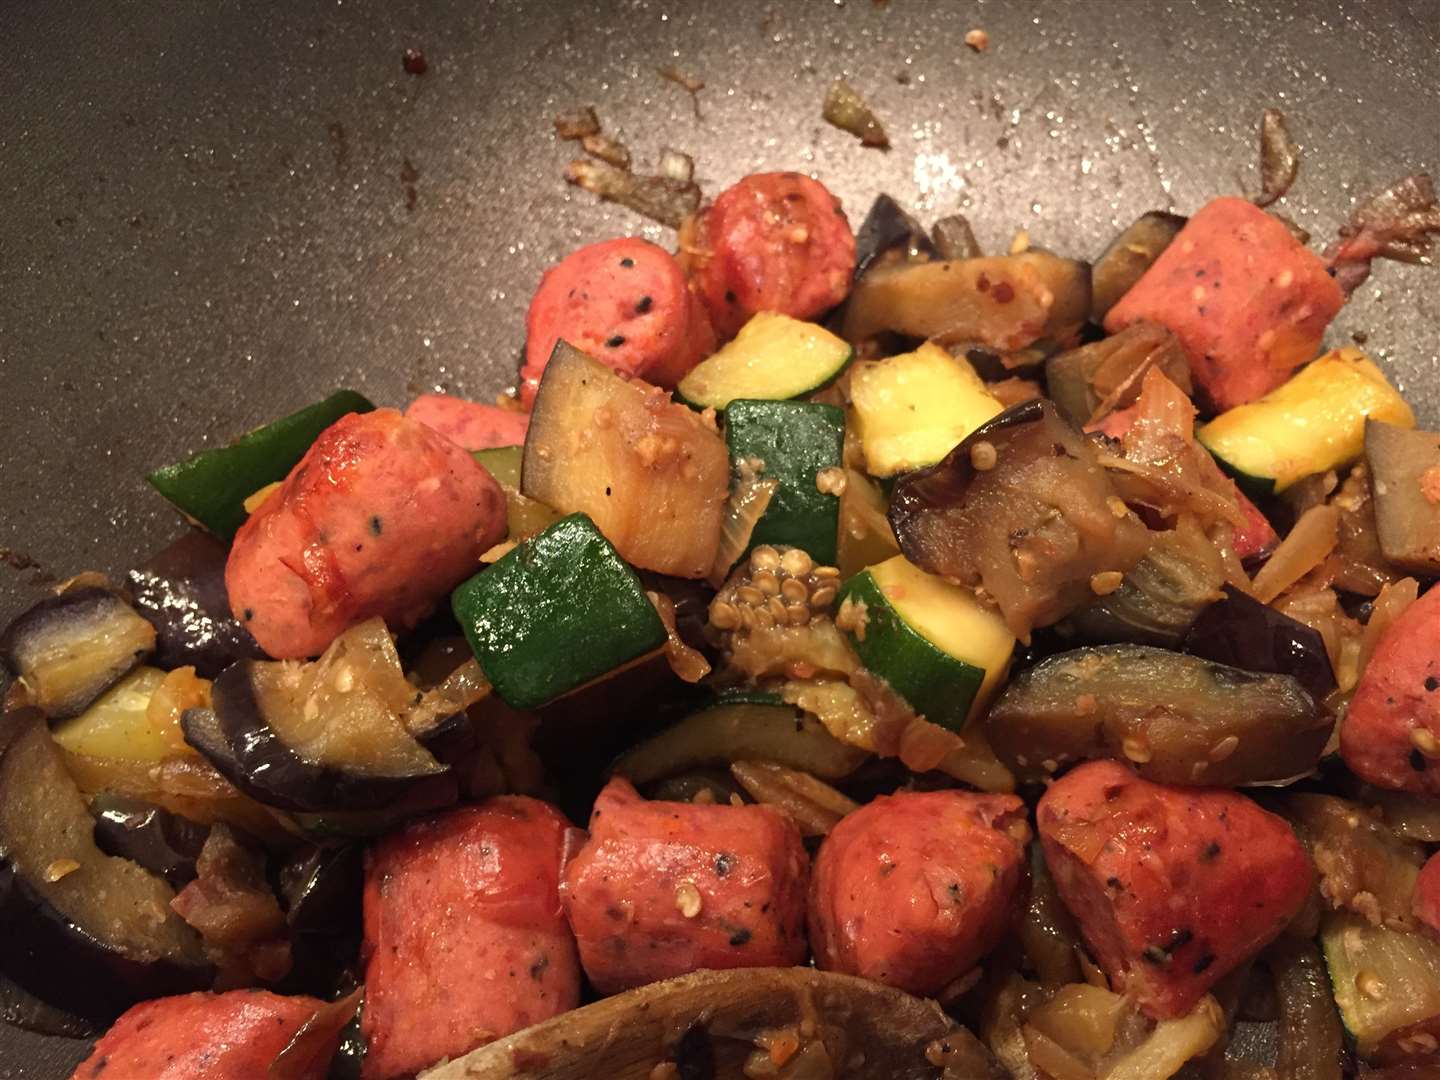 The Heck sausages cooked with courgette and aubergine